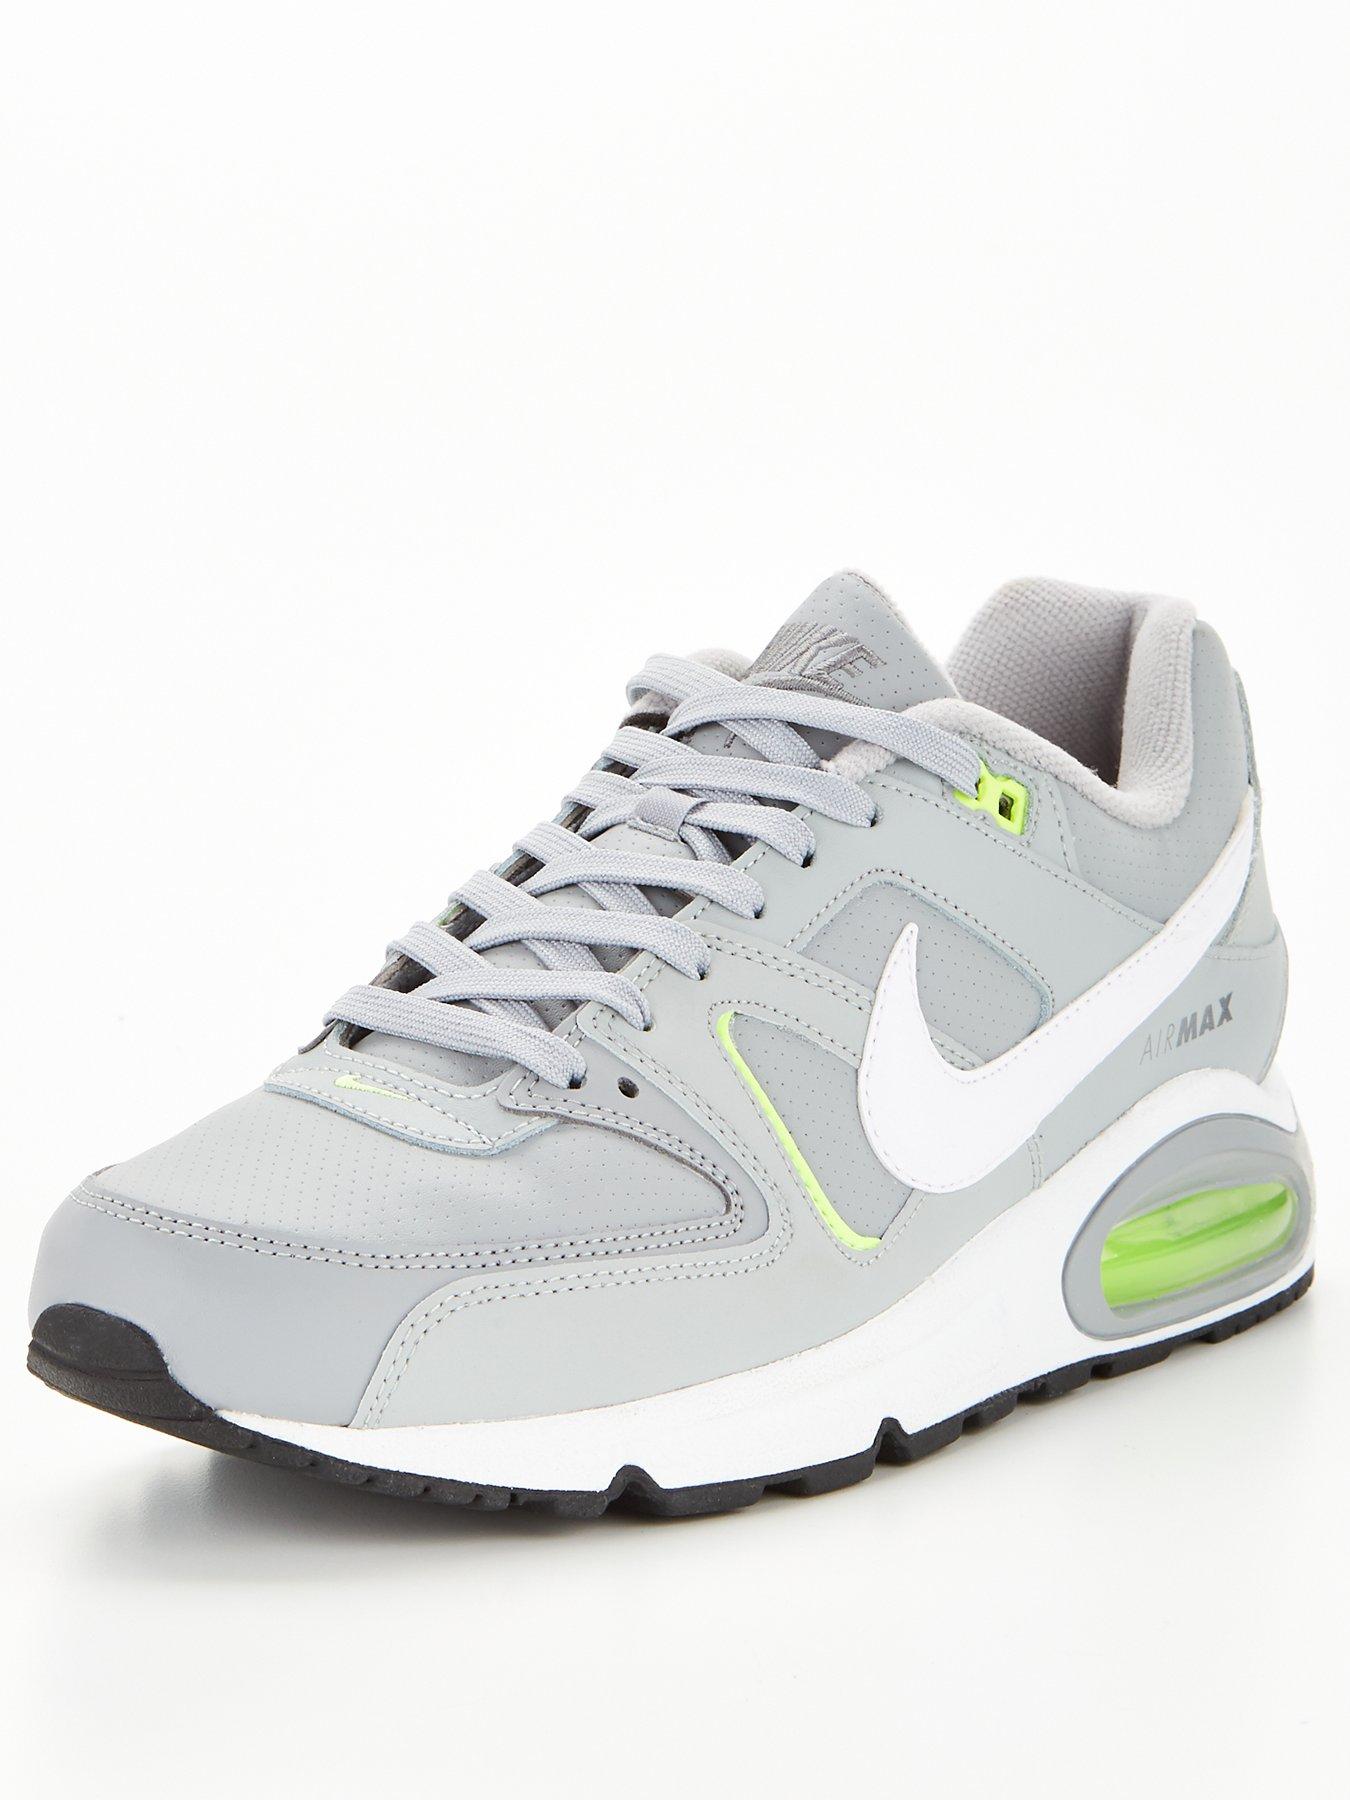 littlewoods mens nike trainers